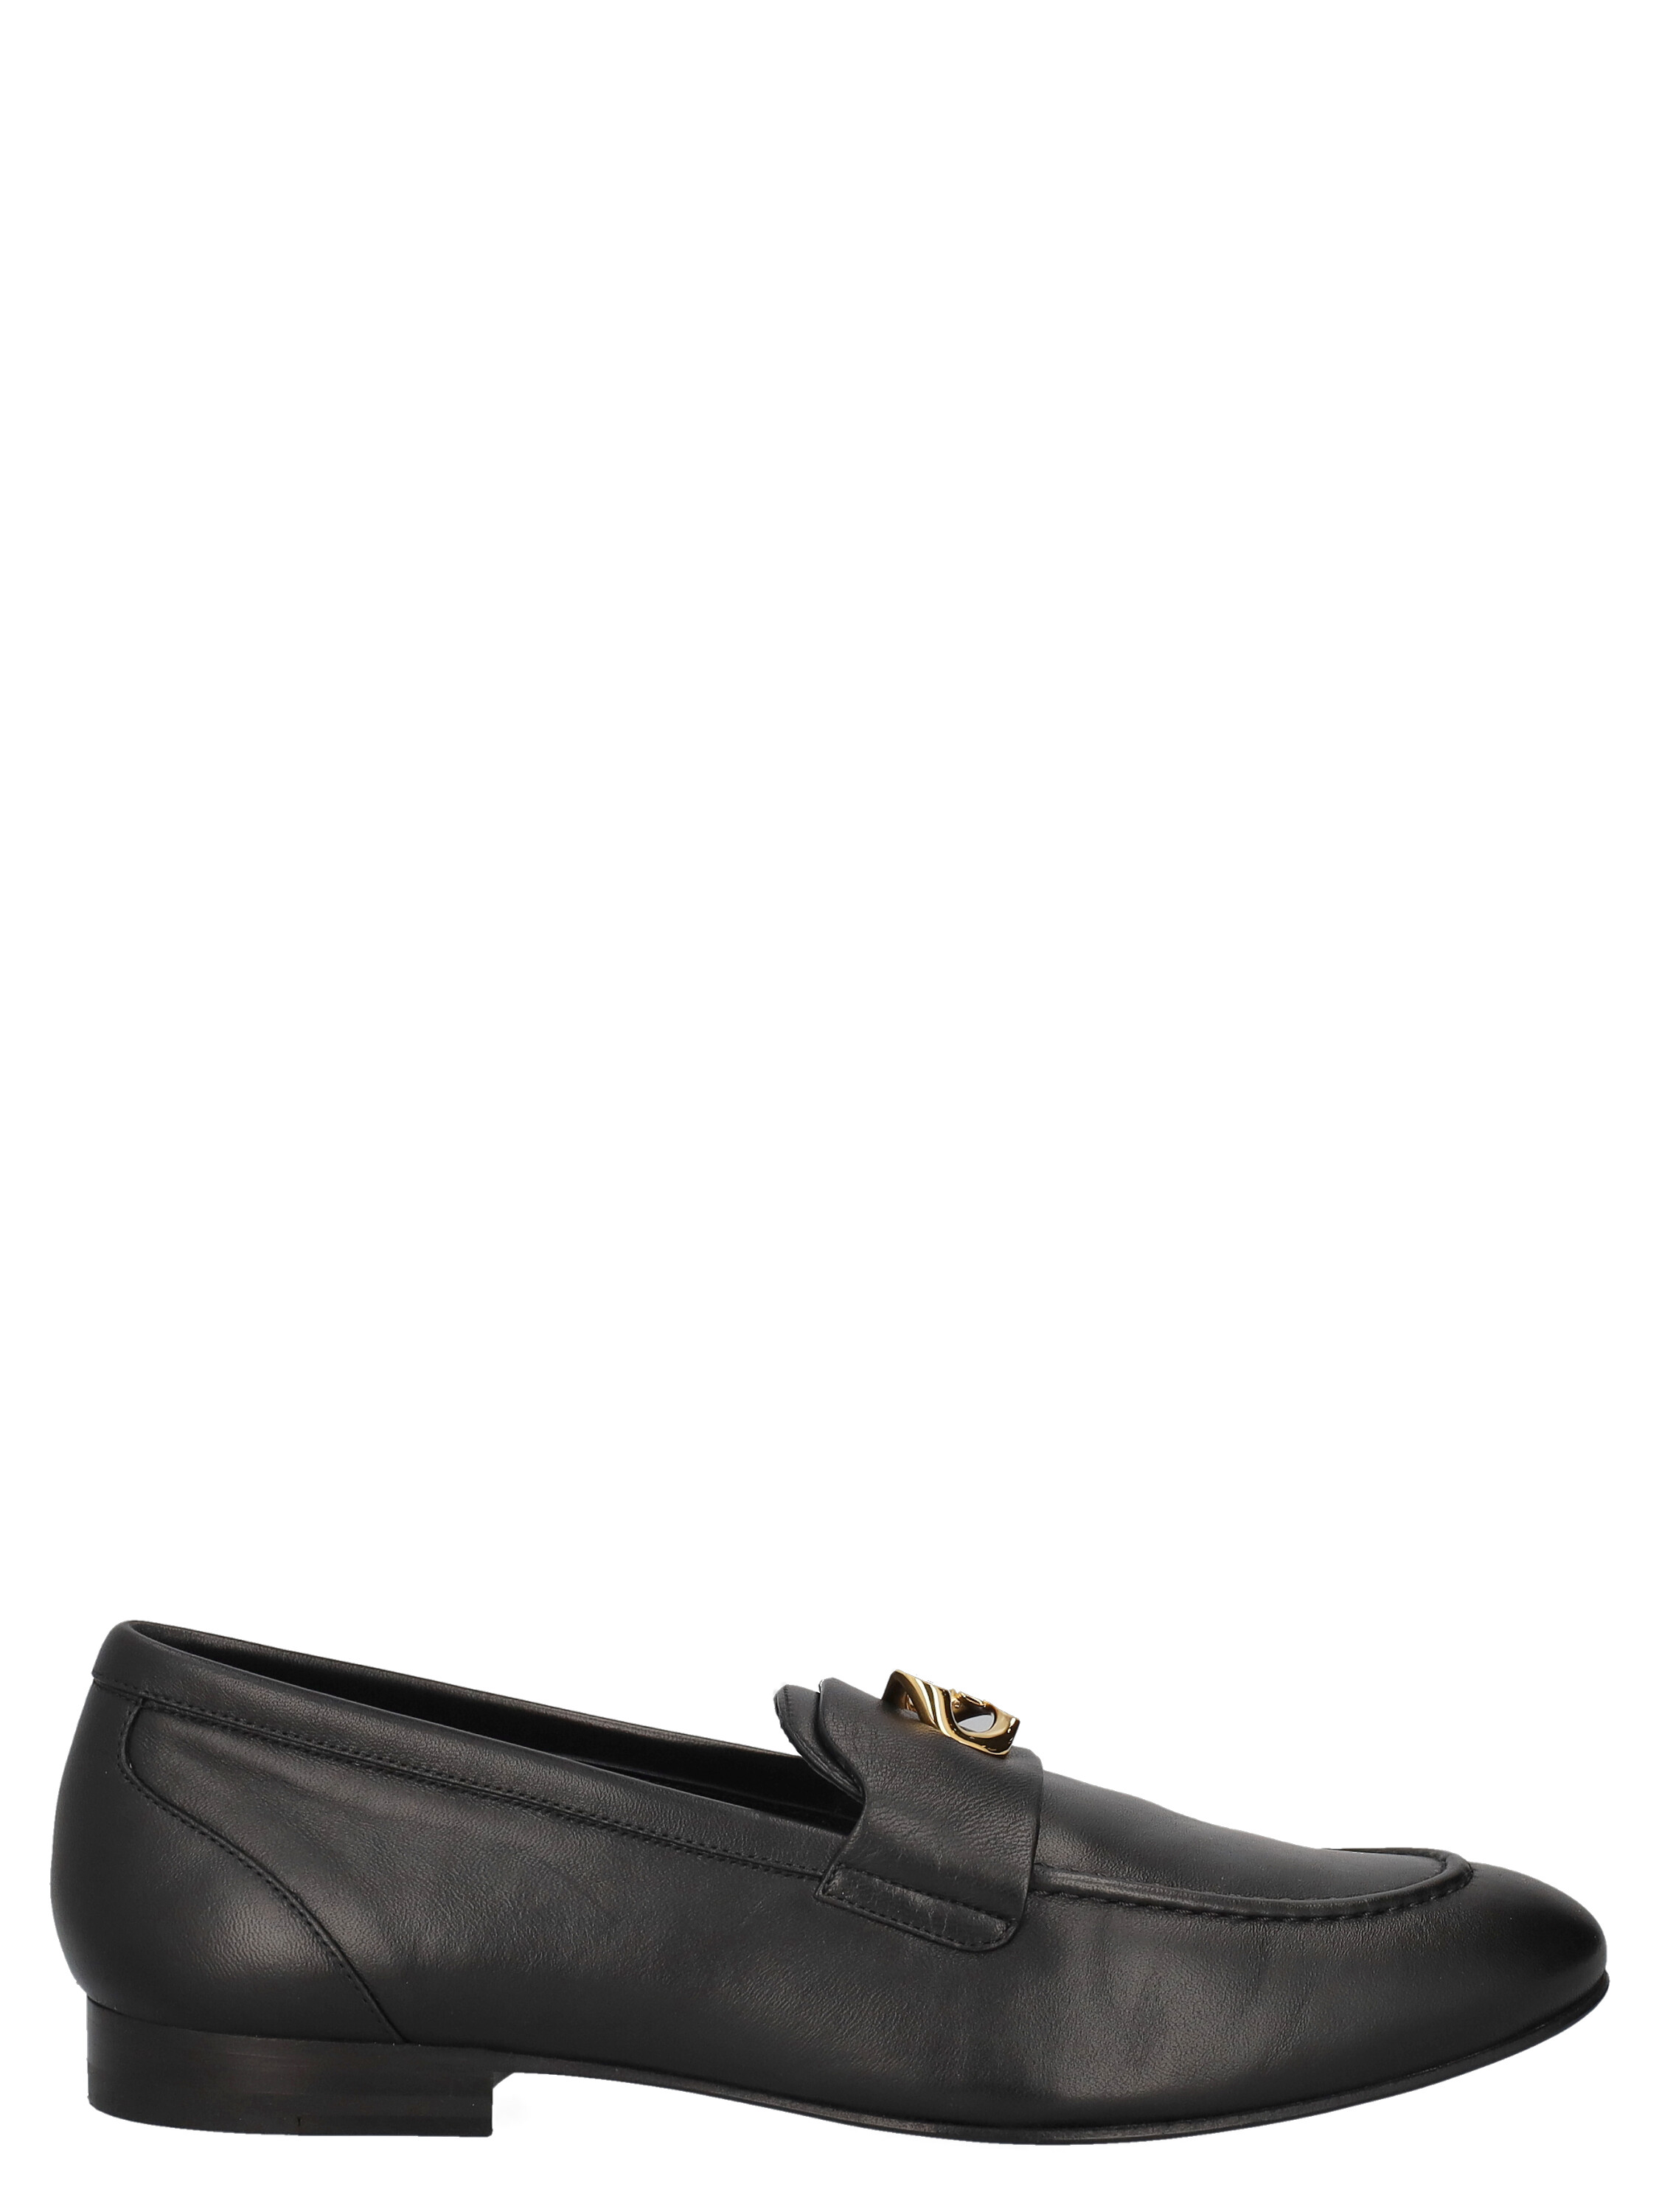 Pre-owned Givenchy Women's Loafers -  - In Black Leather